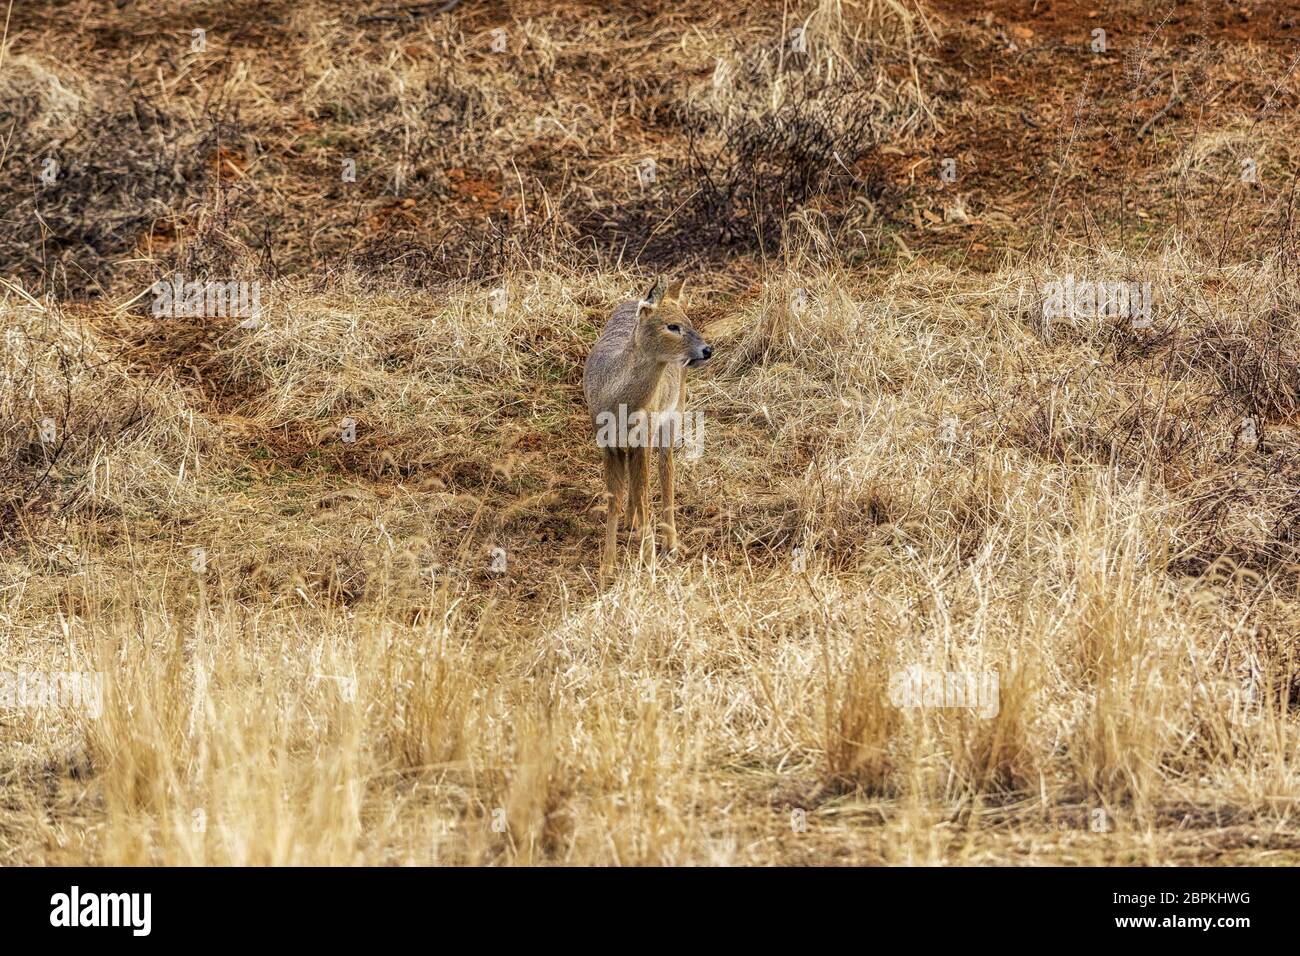 Hydropotes inermis argyropus or also called water deer "gorani" eating grass on tall grass land in National Institute of Ecology in Seocheon, South Ko Stock Photo